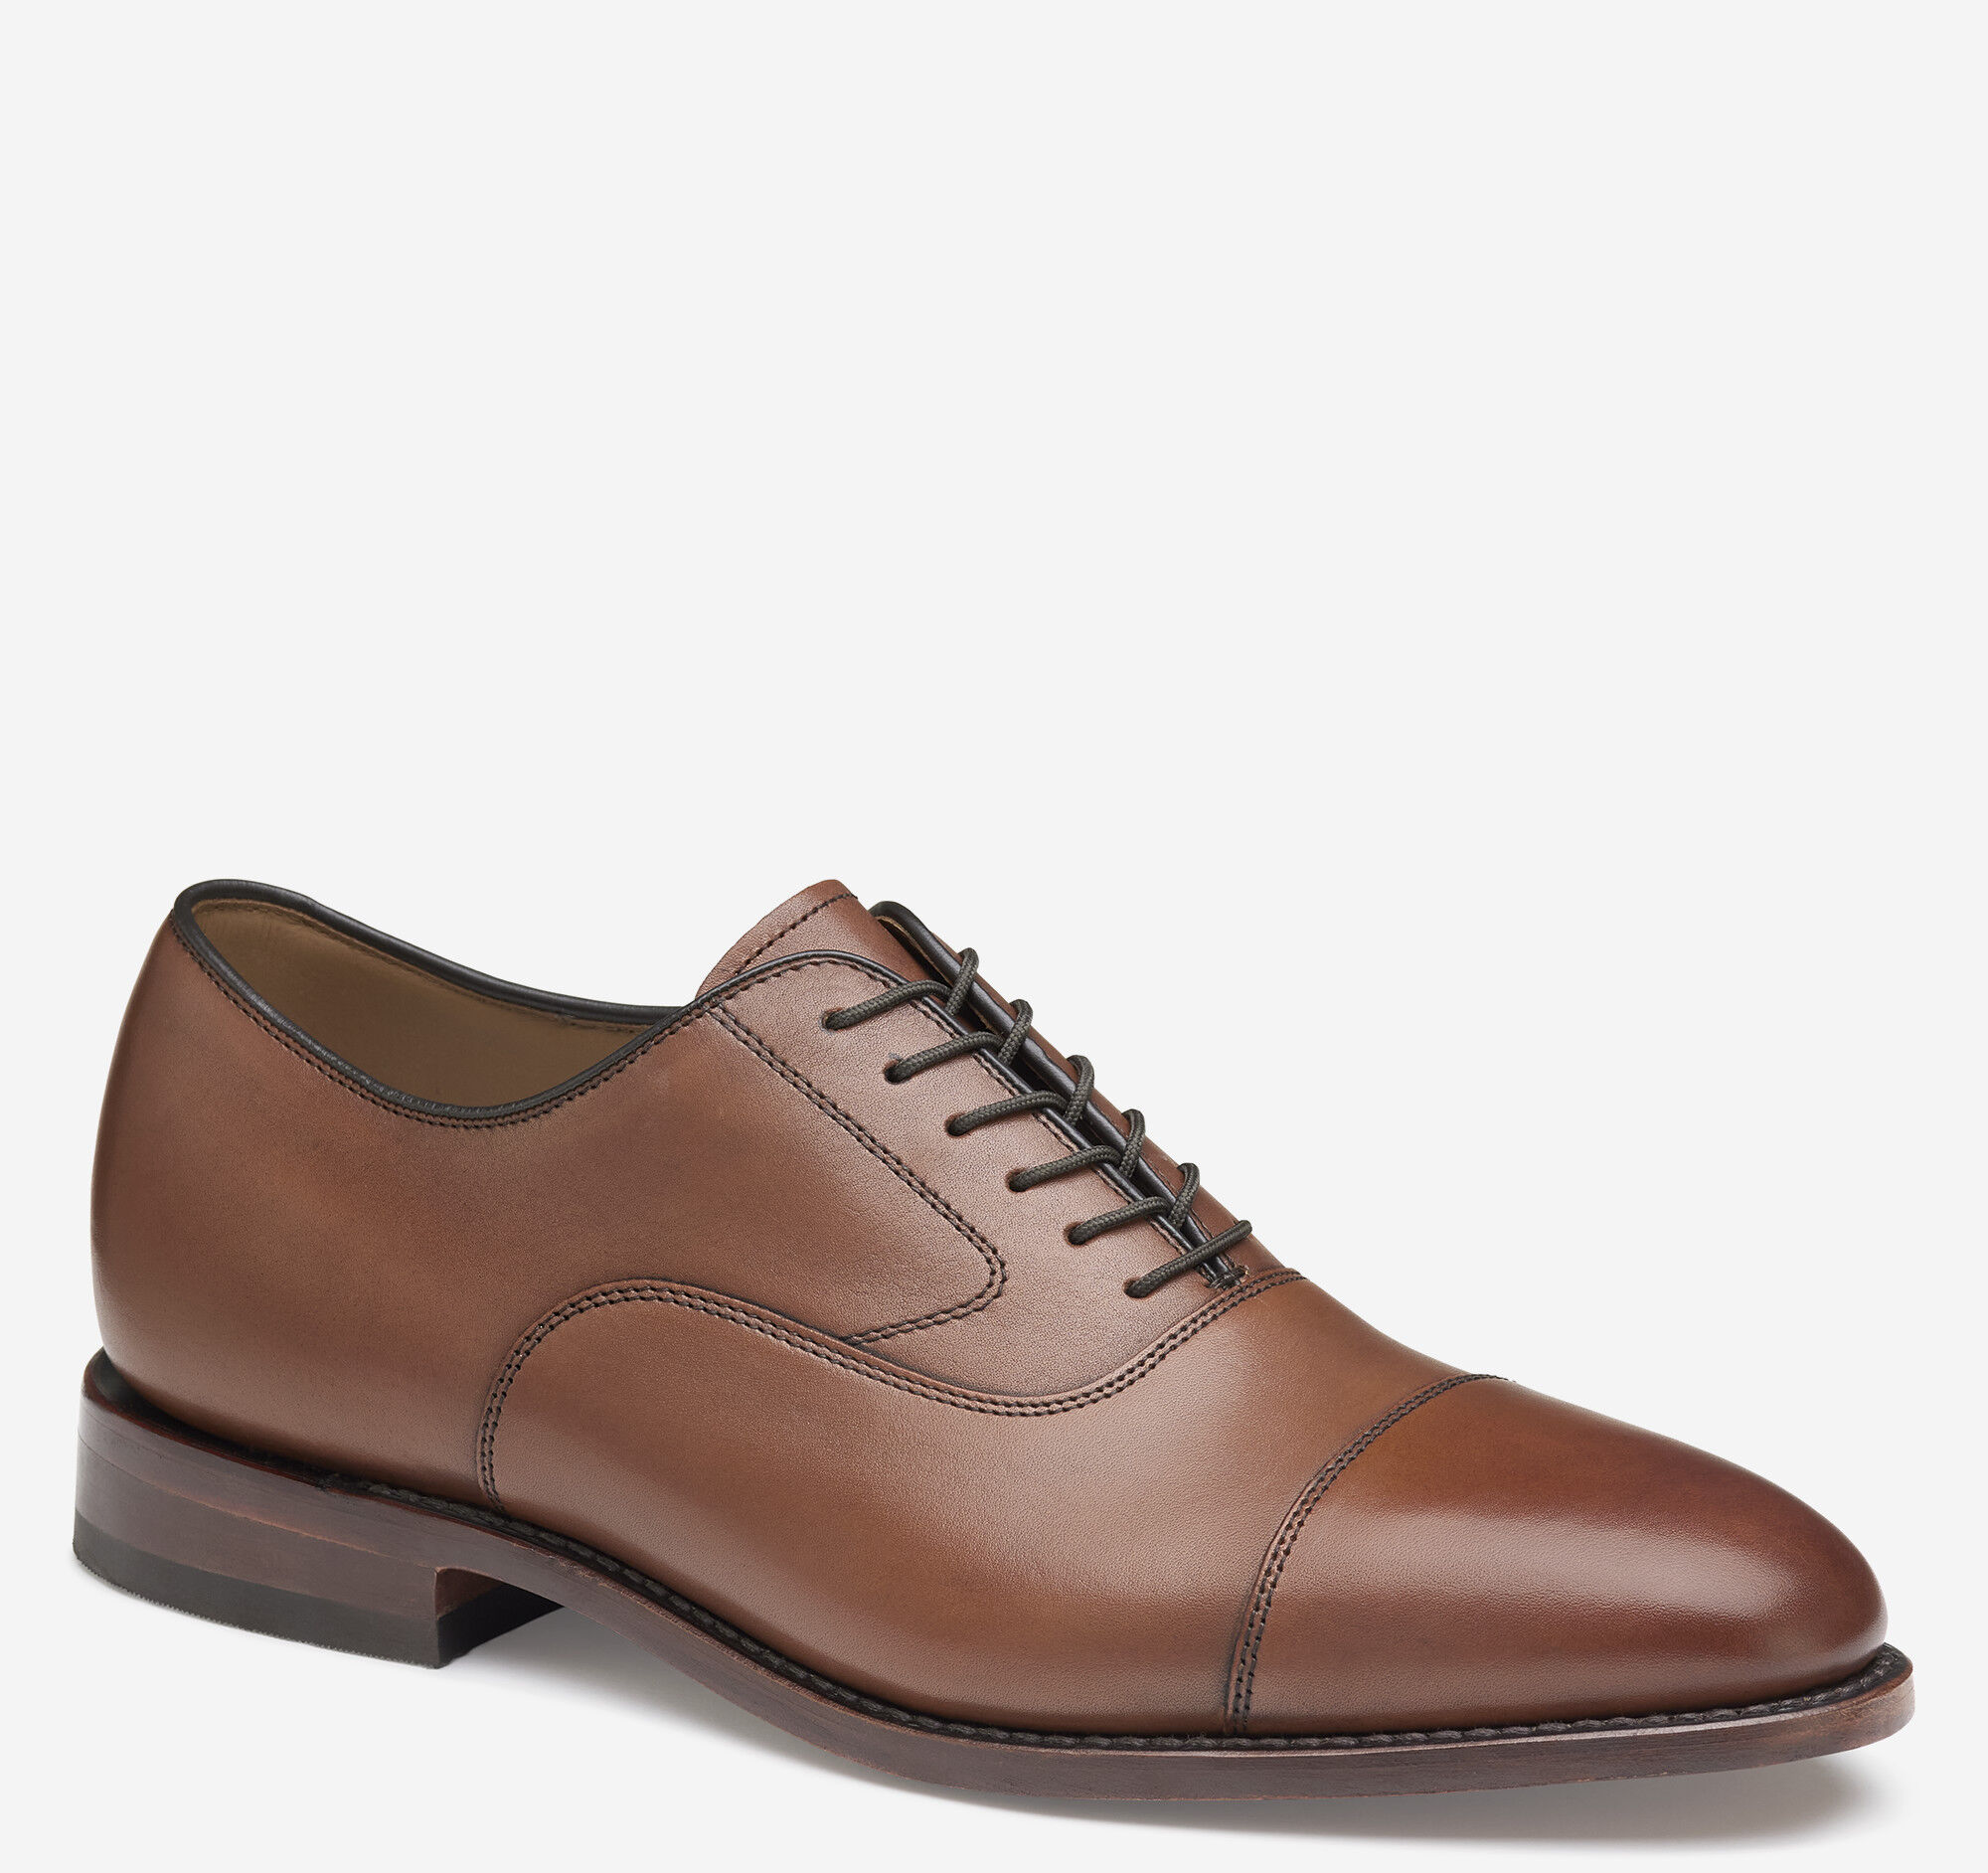 johnston and murphy mens casual shoes